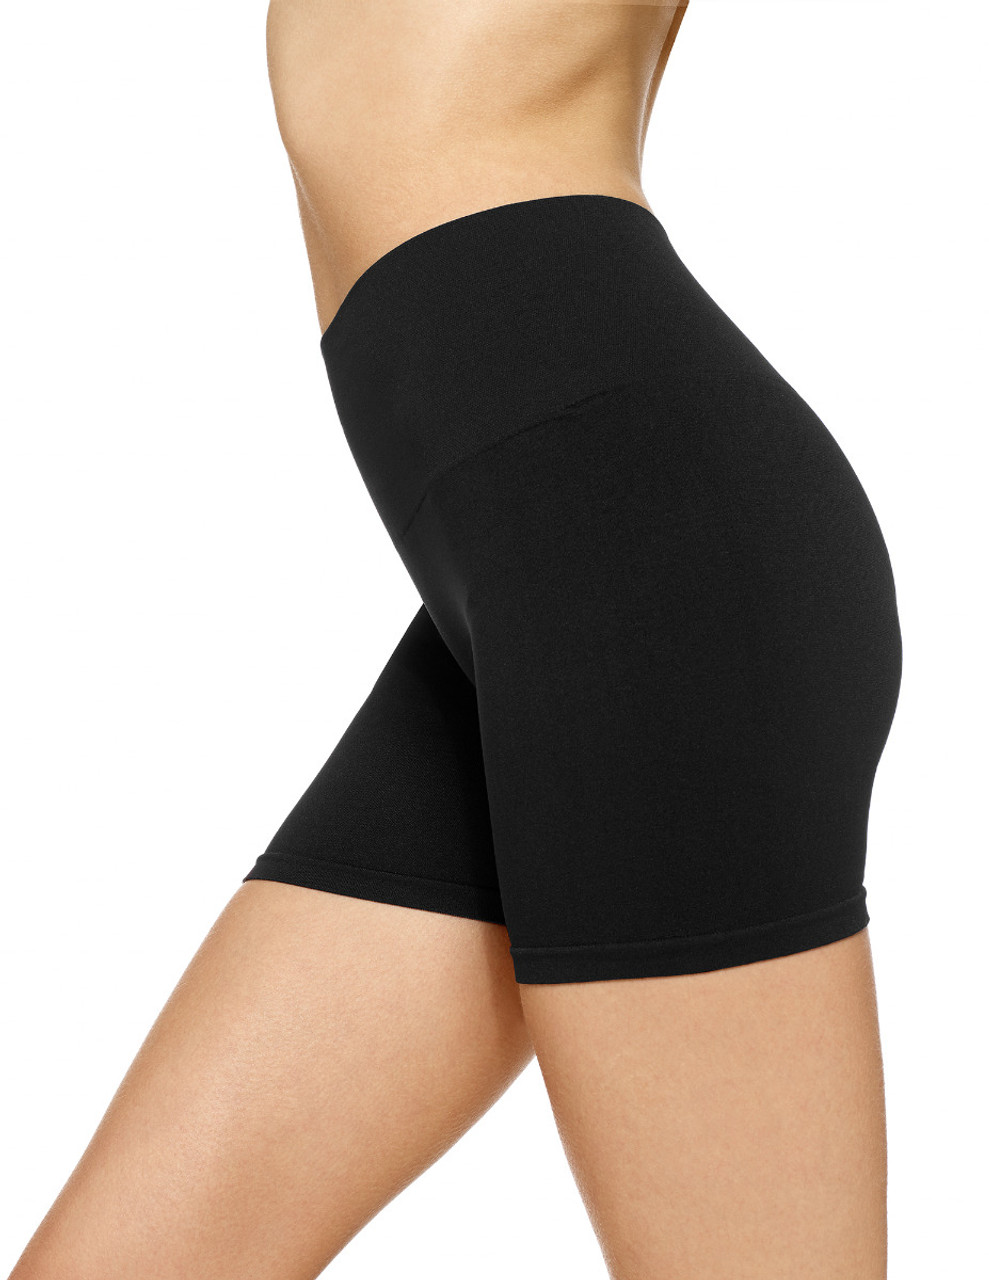 Cotton Slip Shorts - Women's Above Knee Tights, extra long